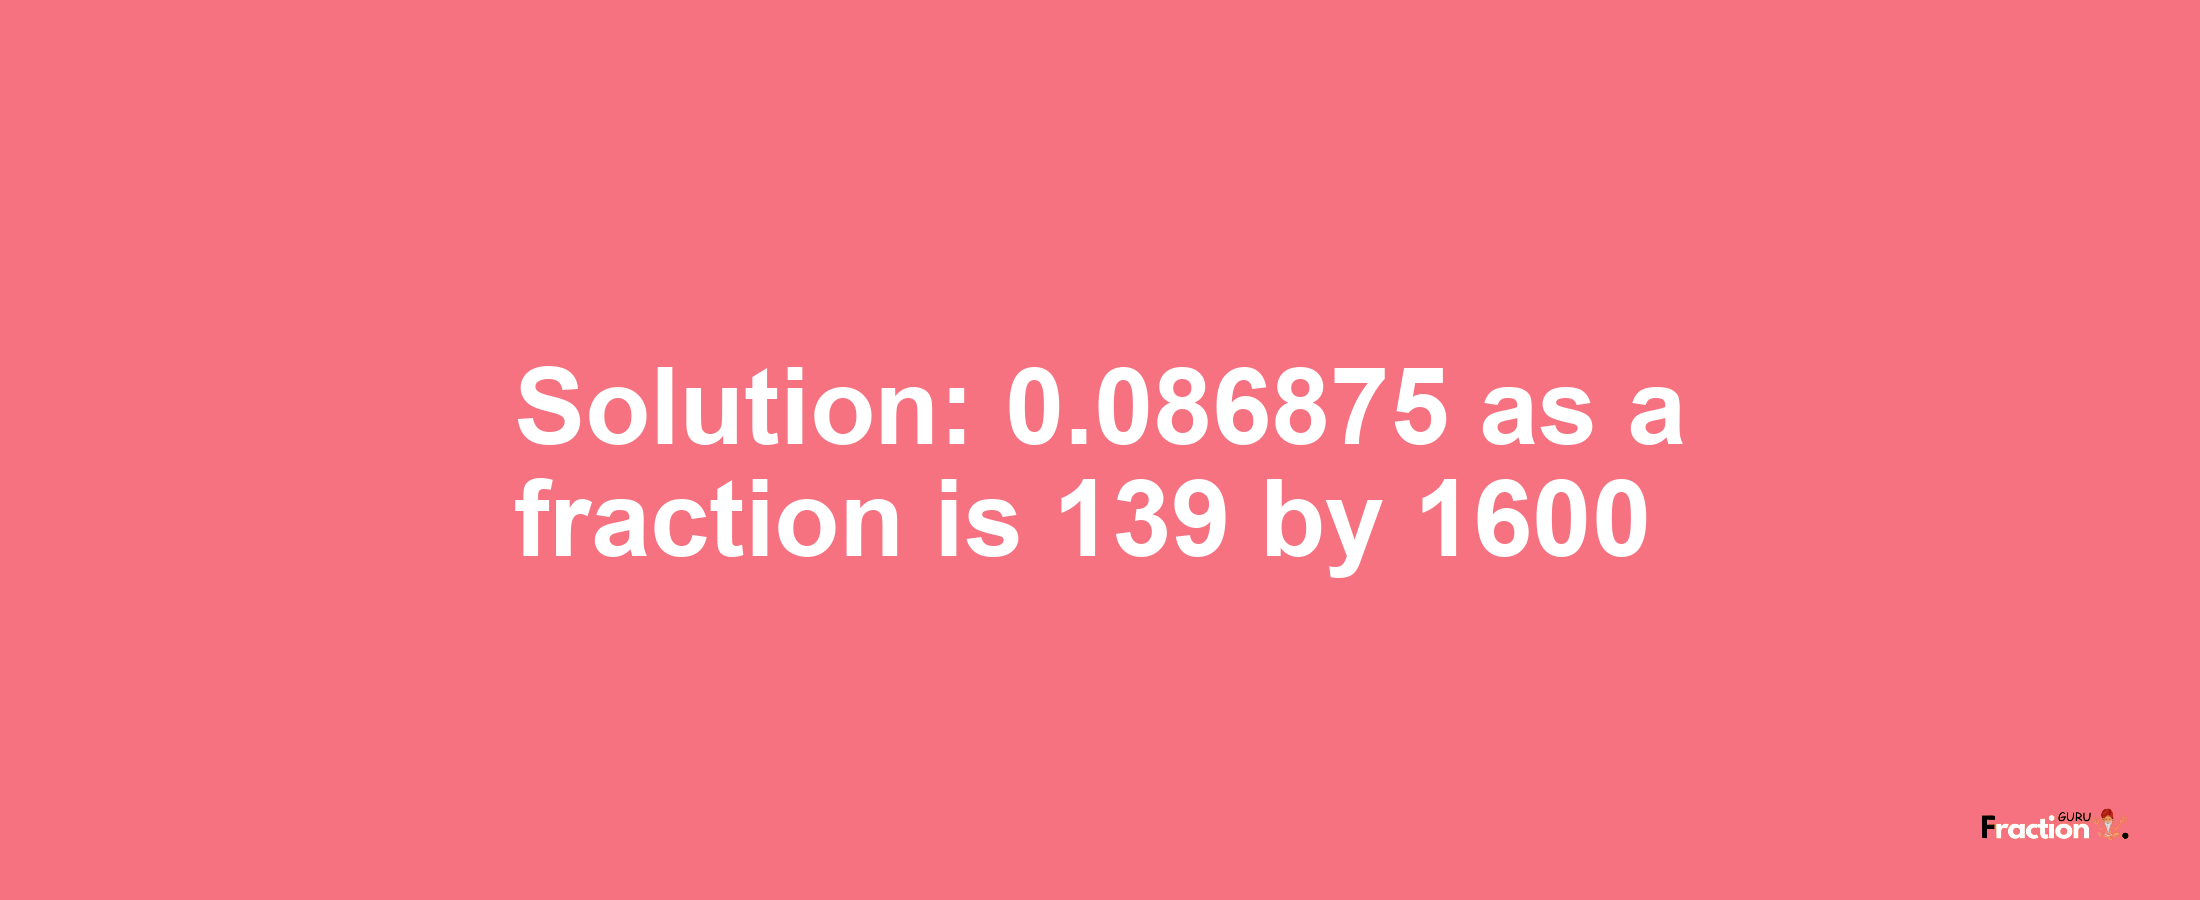 Solution:0.086875 as a fraction is 139/1600